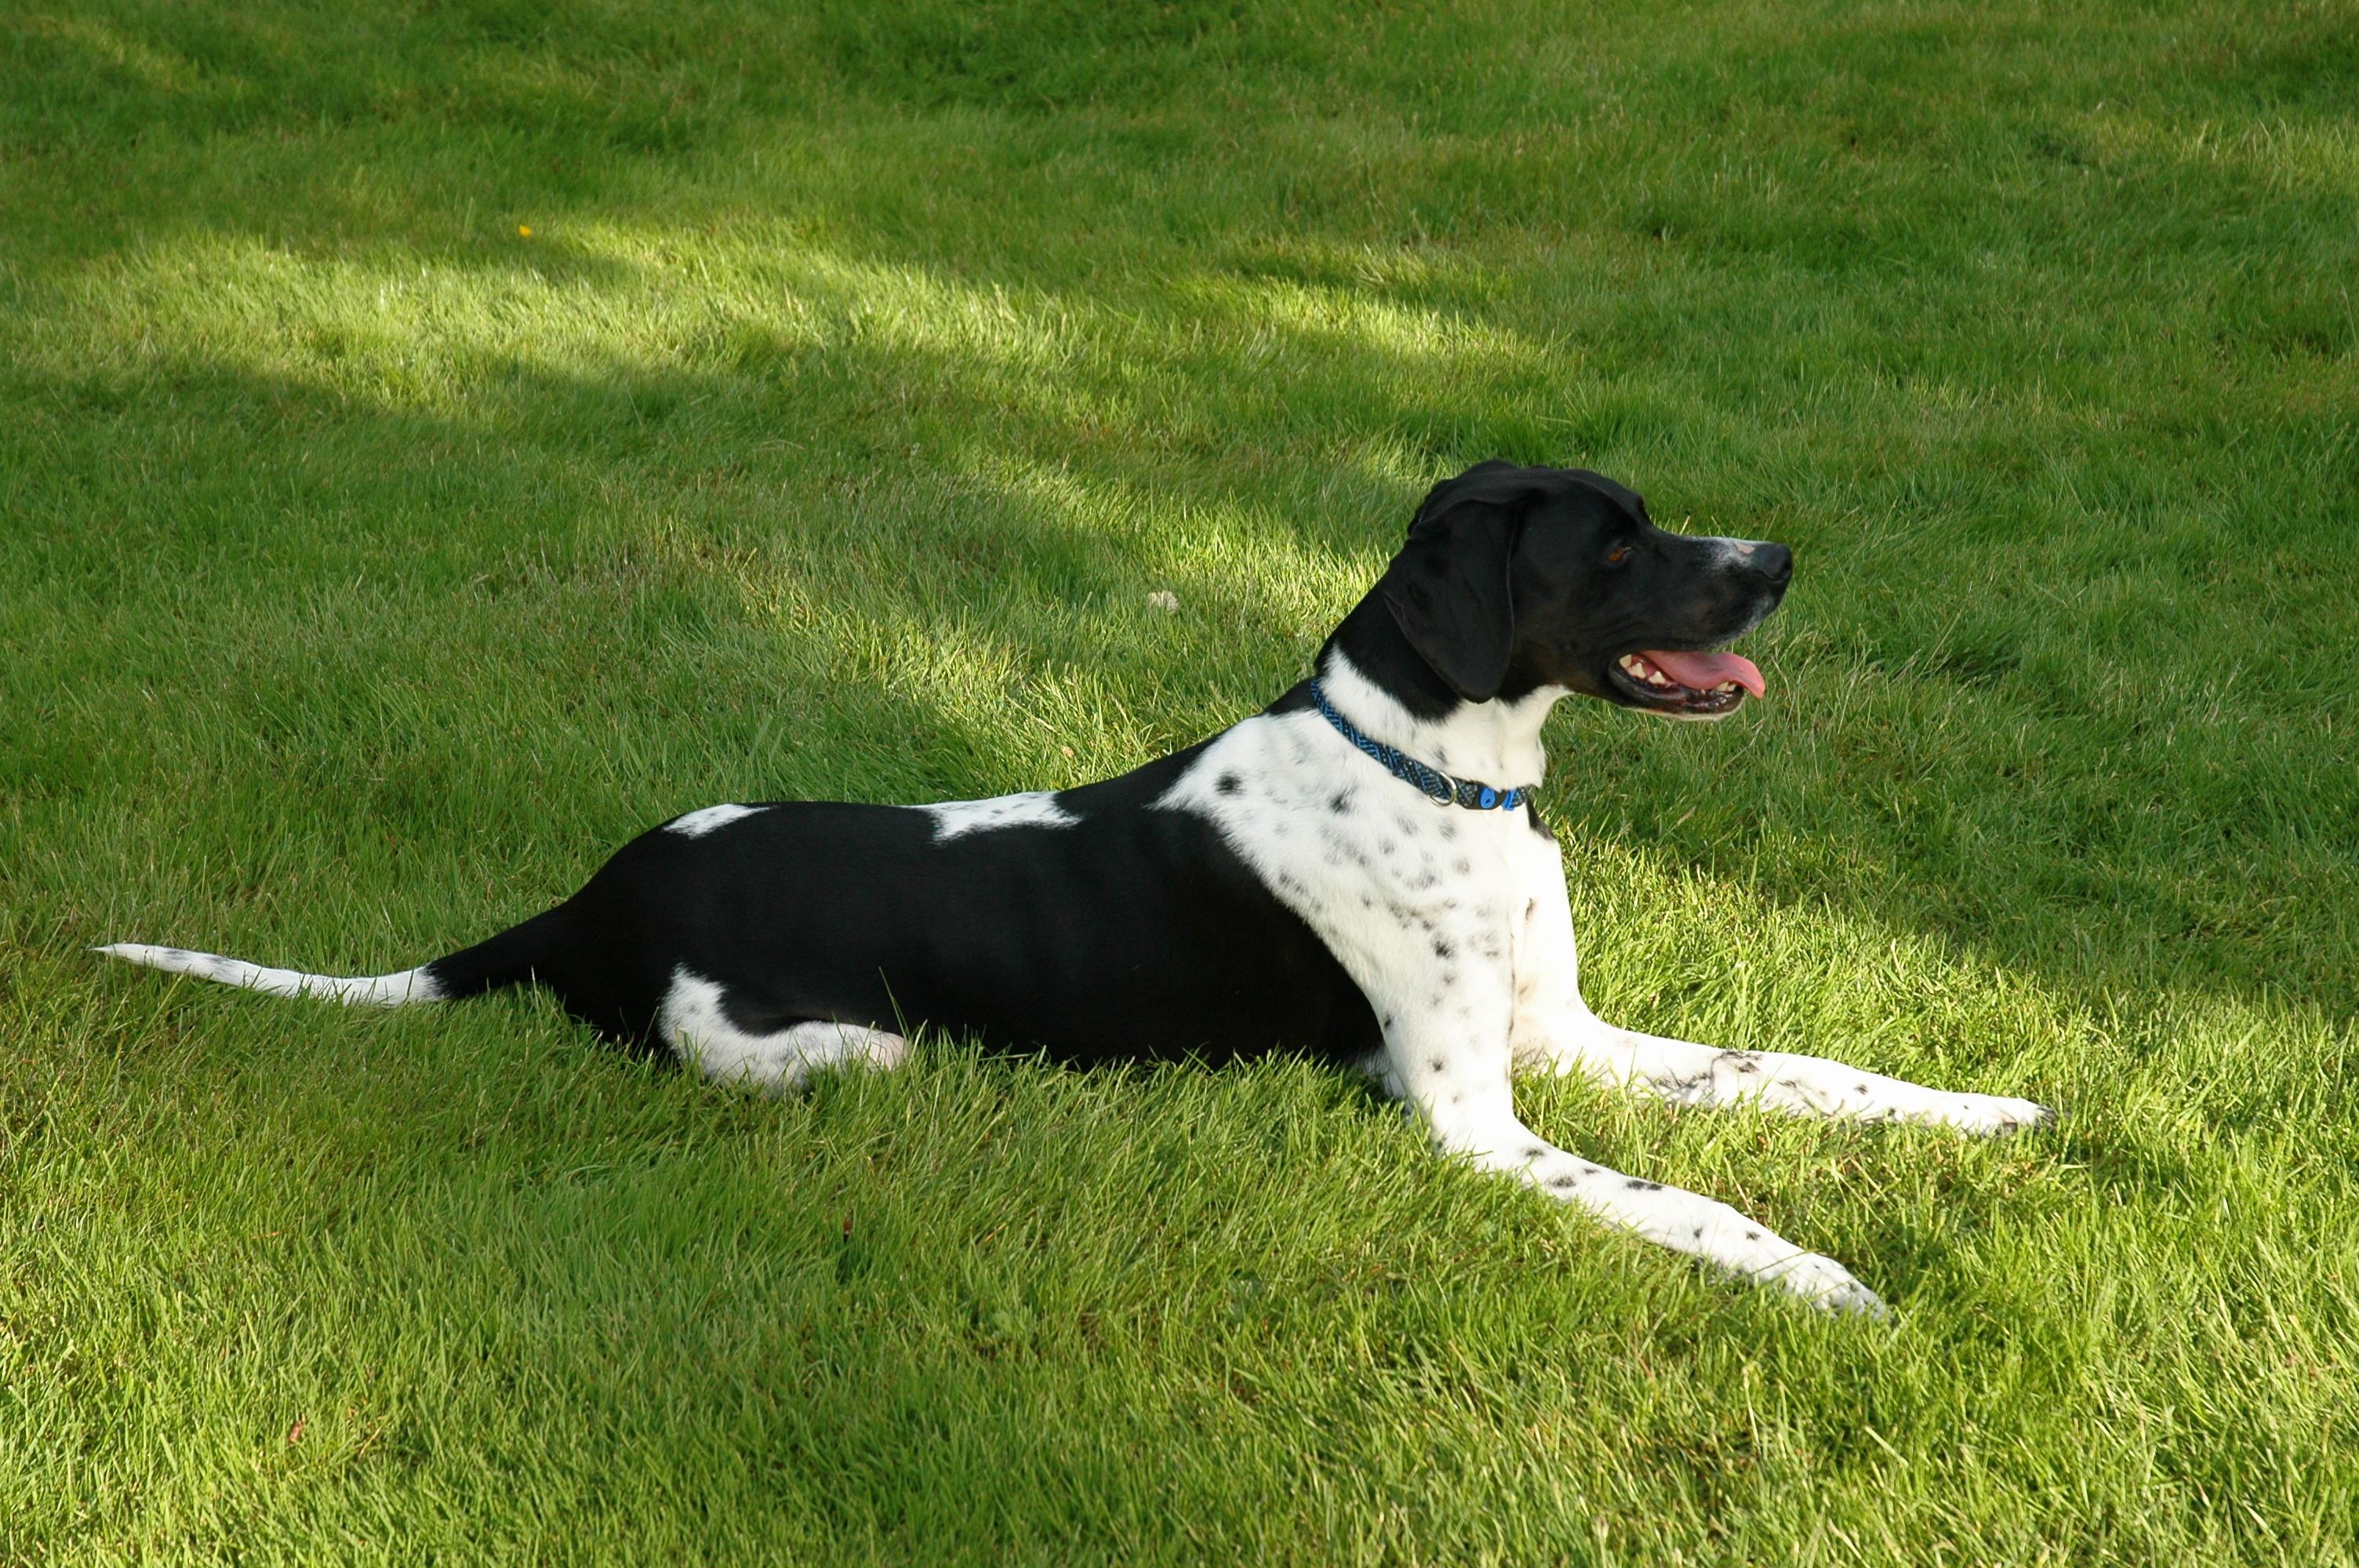 File:Lucy the Dog on the grass.JPG - Wikipedia